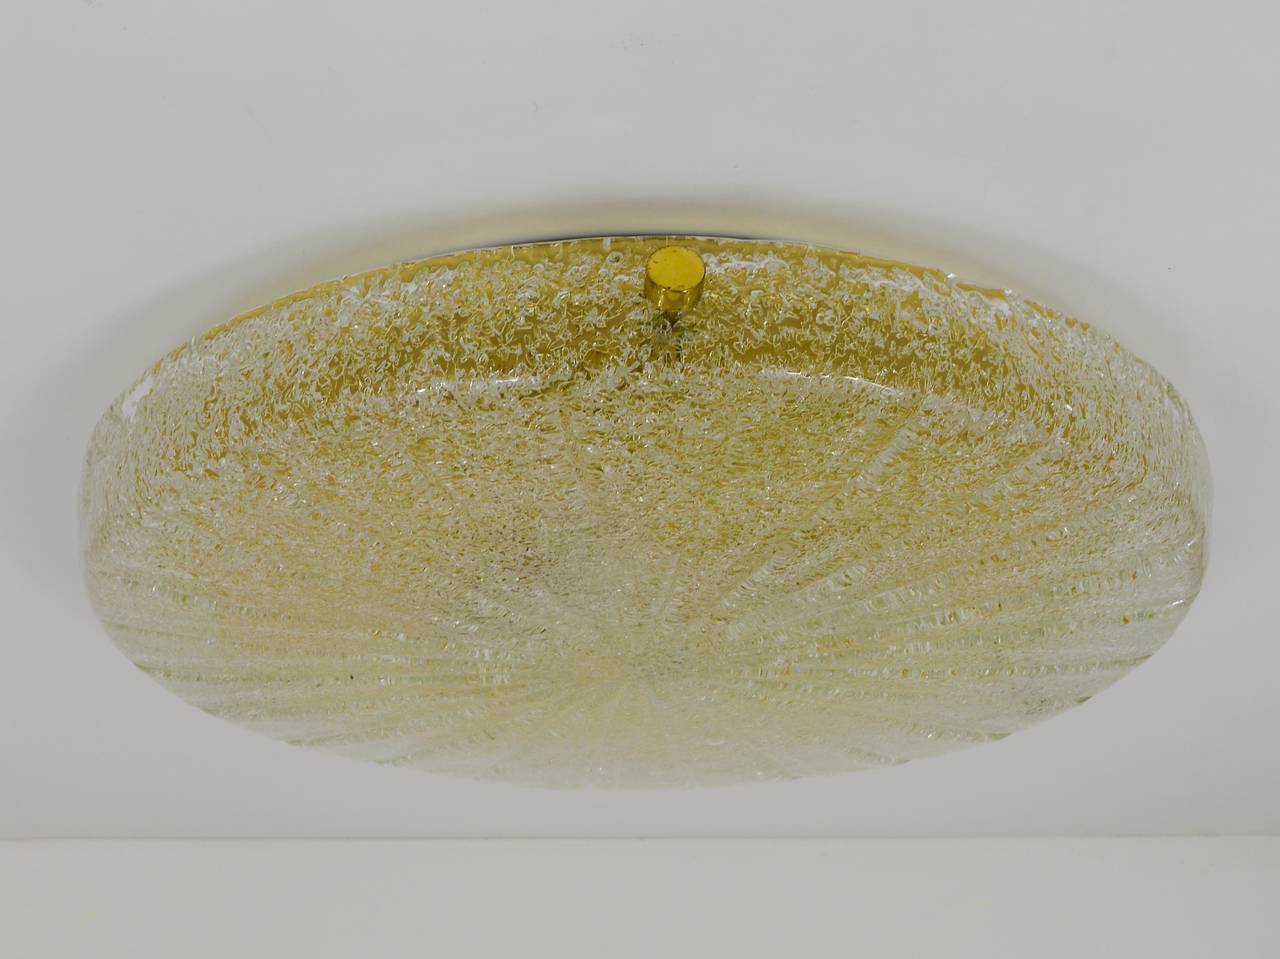 A beautiful flush mount, designed by Carl Fagerlund, executed in the 1950s by Orrefors Sweden. Has a nice, textured 